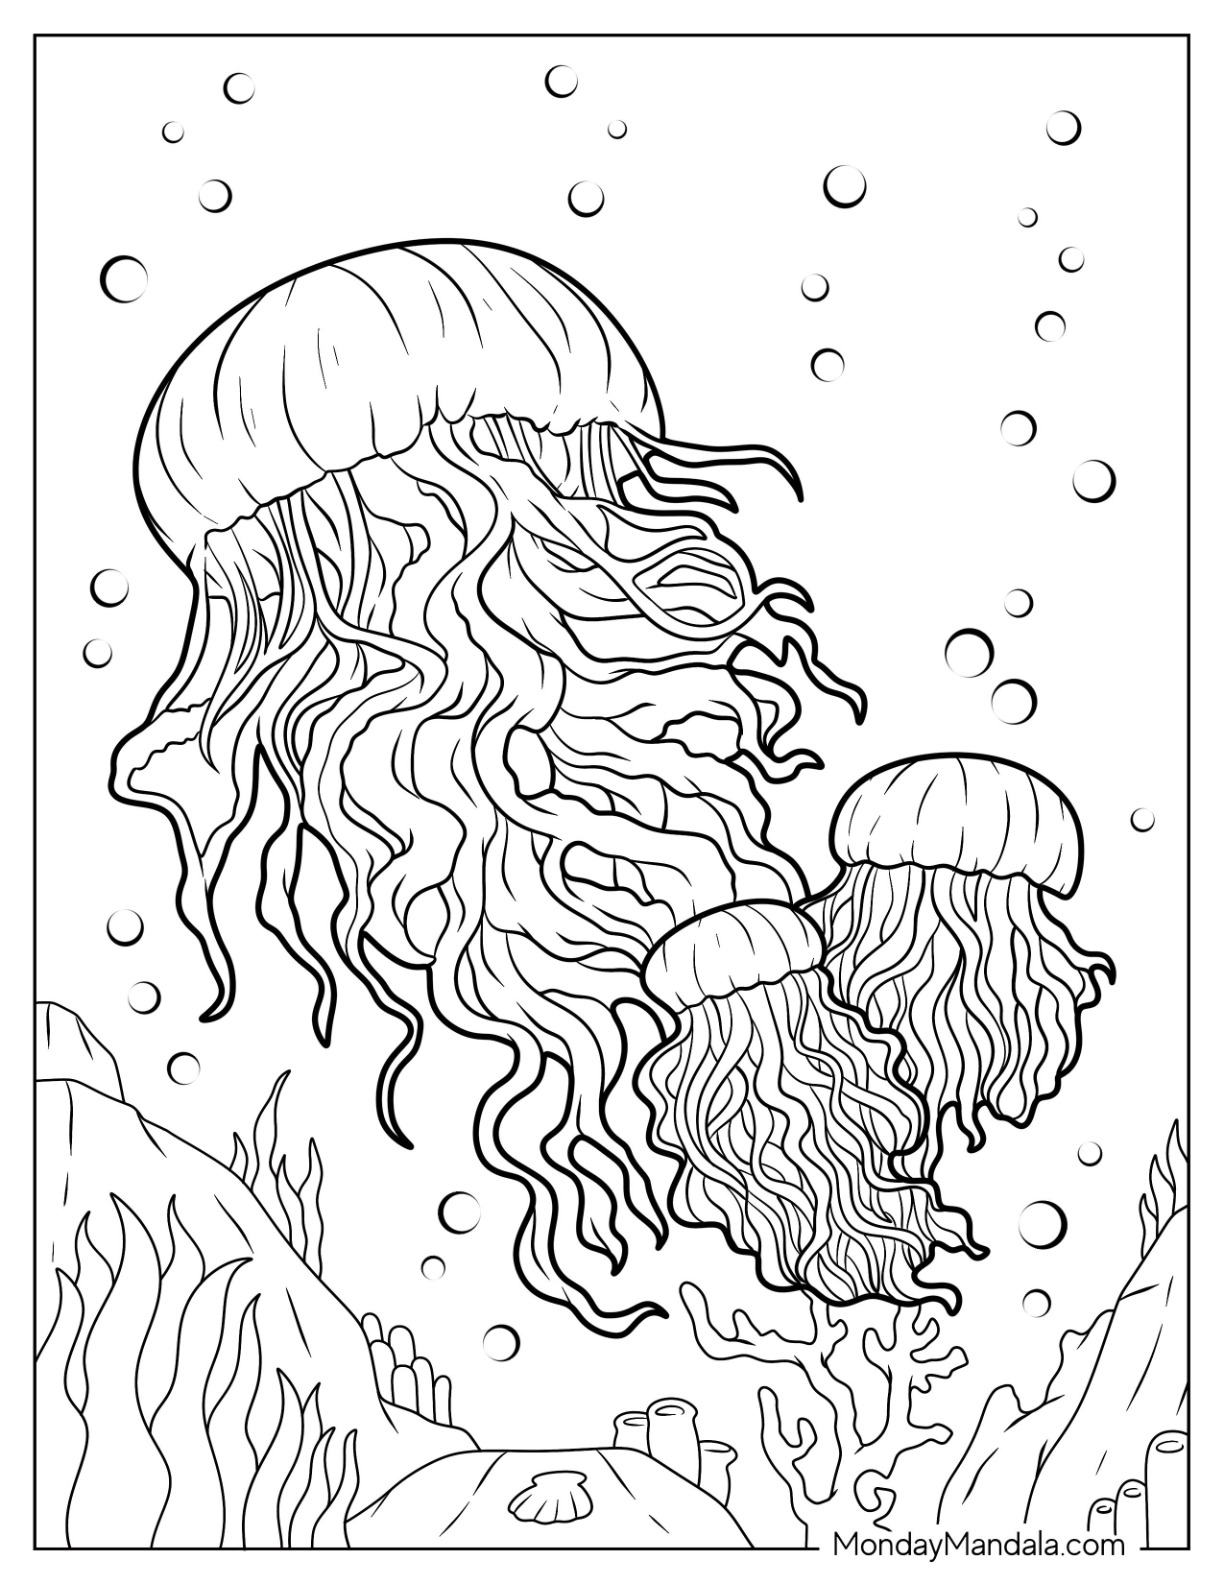 Jellyfish coloring pages free pdf printables